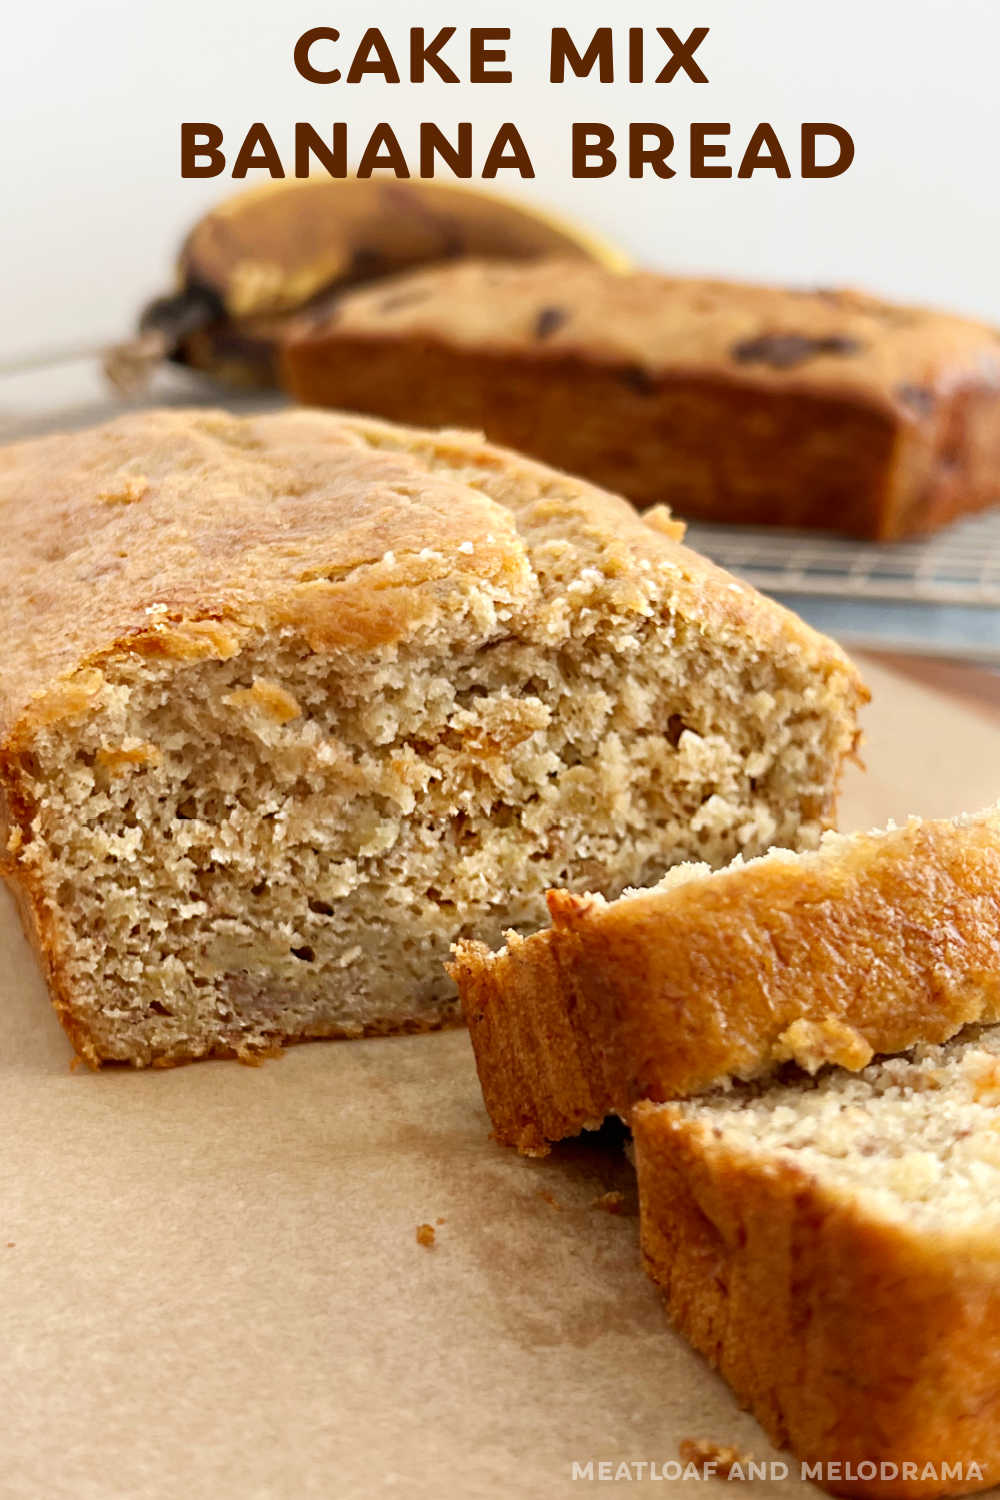 This Easy Cake Mix Banana Bread recipe makes the BEST banana bread with cake mix, ripe bananas, eggs and applesauce. Moist, delicious and a great recipe for using up ripe bananas! via @meamel